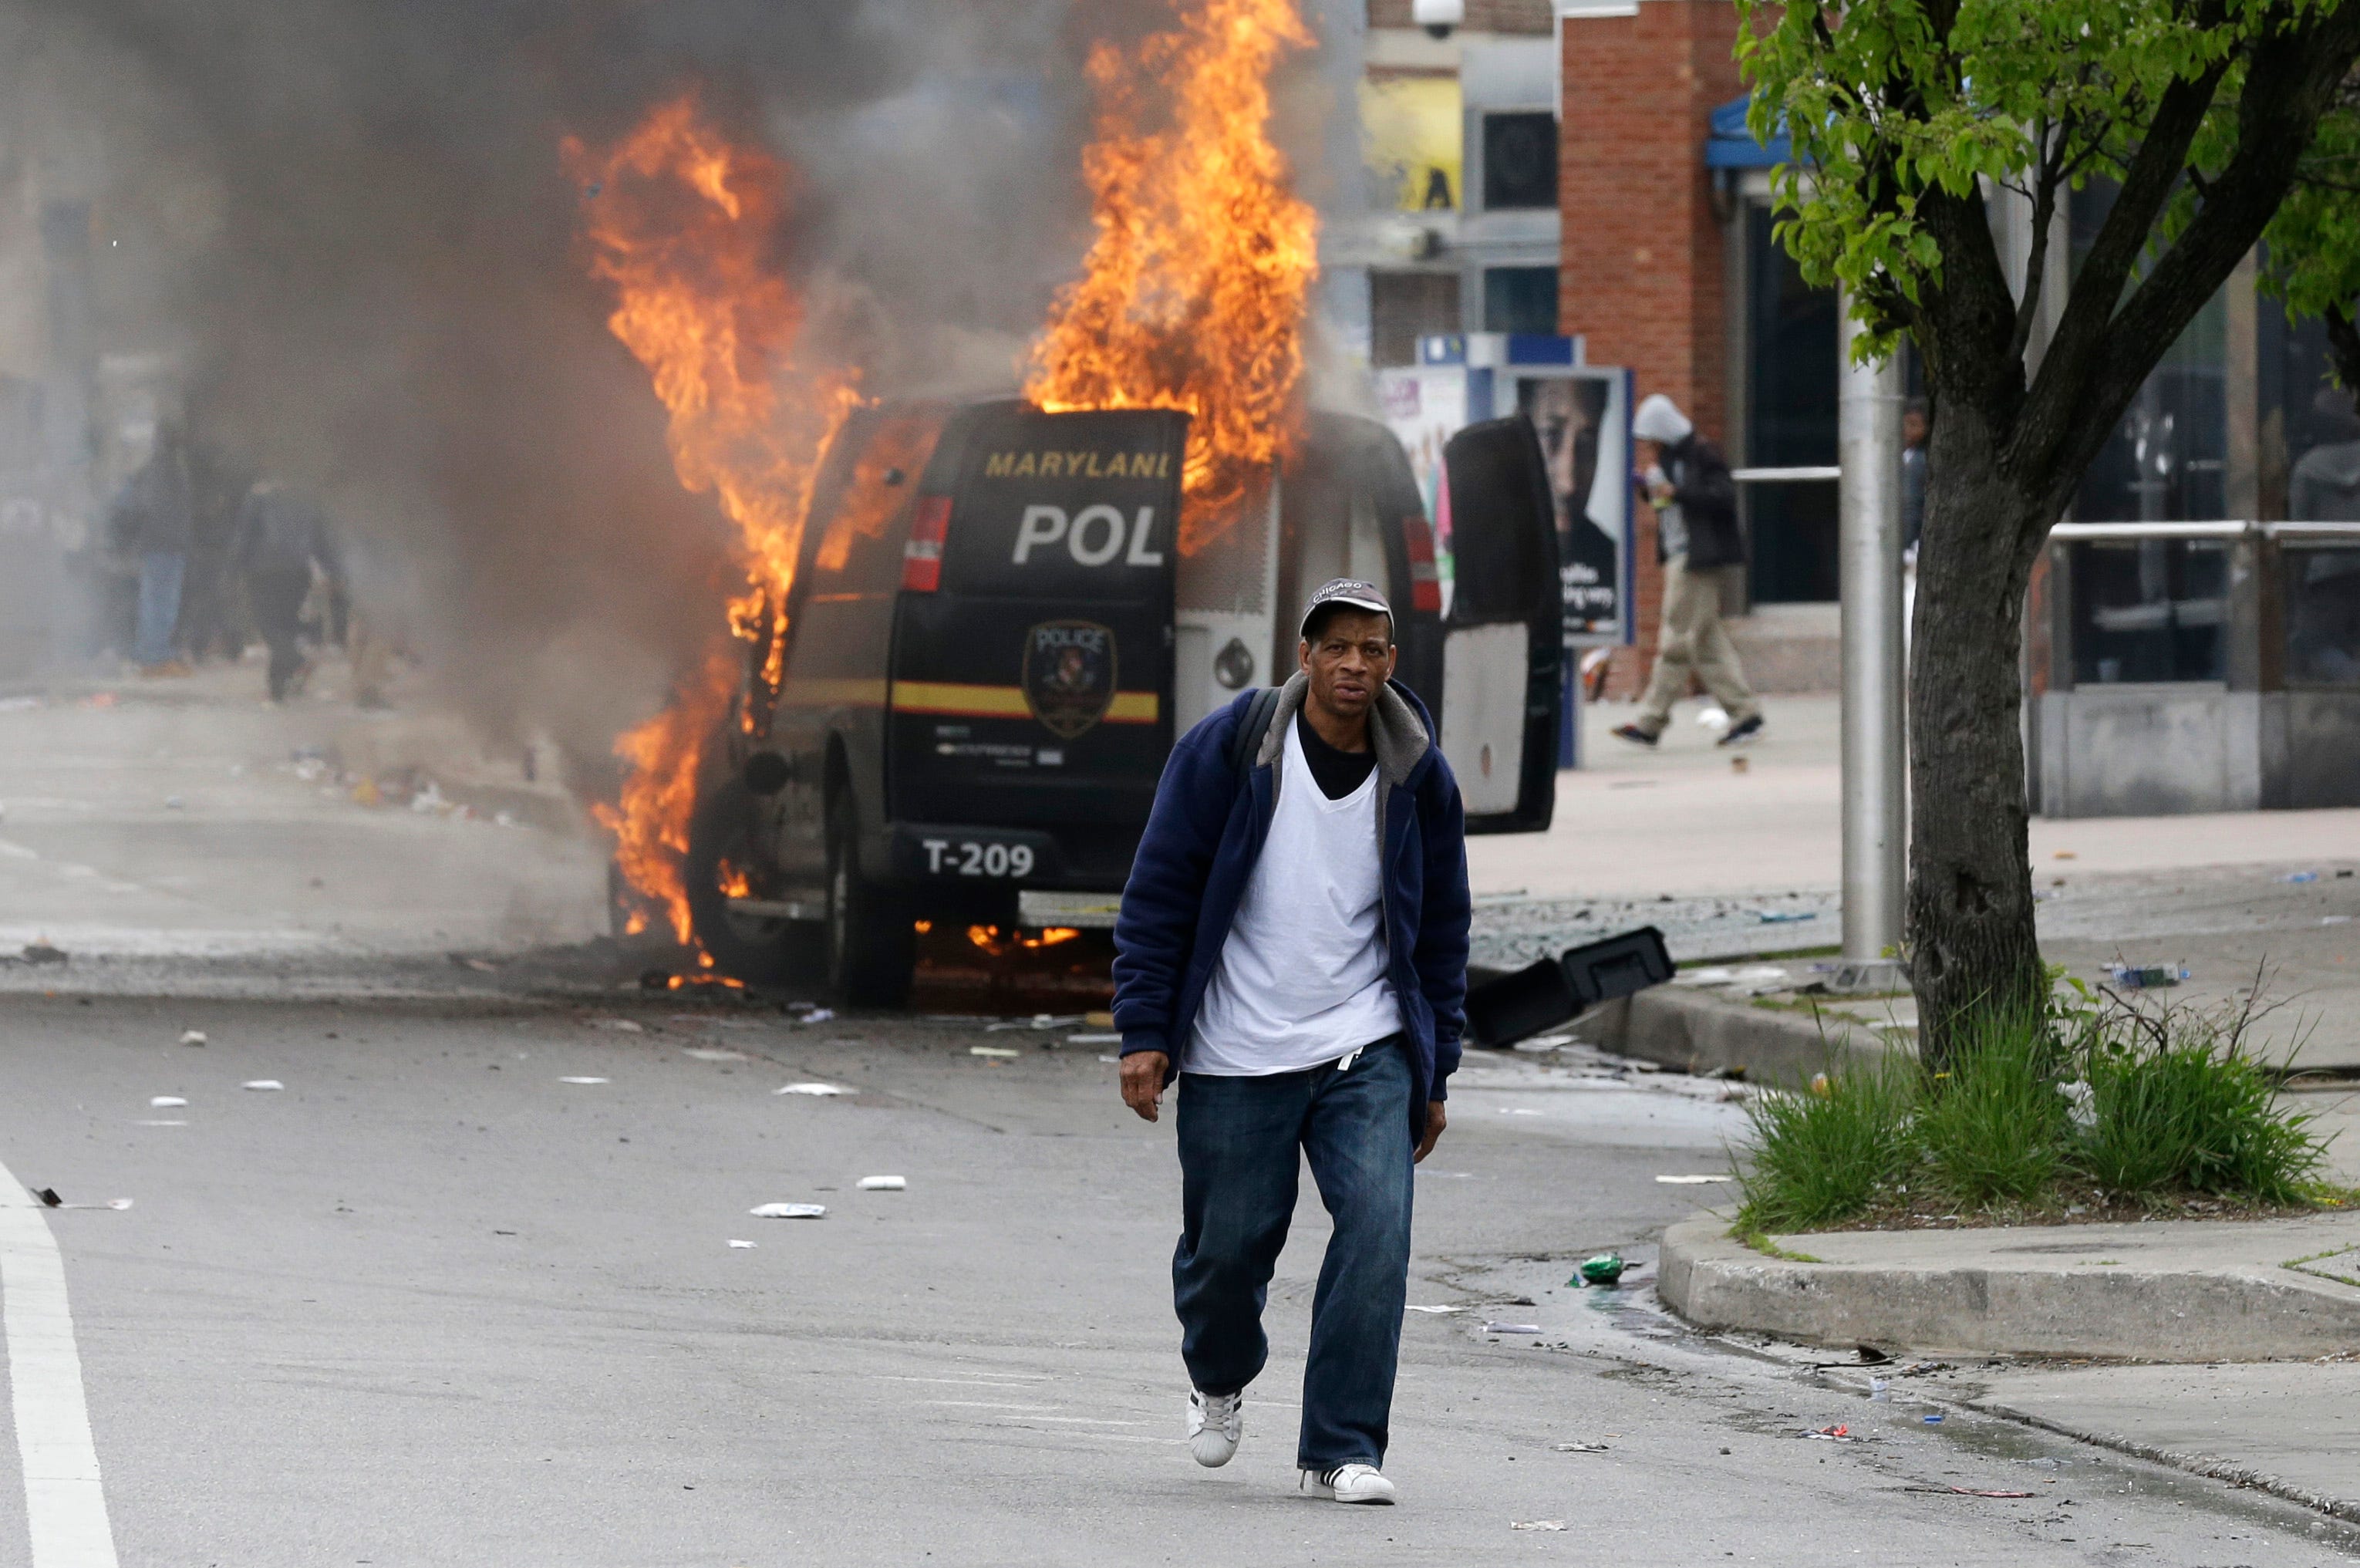 Baltimore police, protesters clash; 15 officers hurt